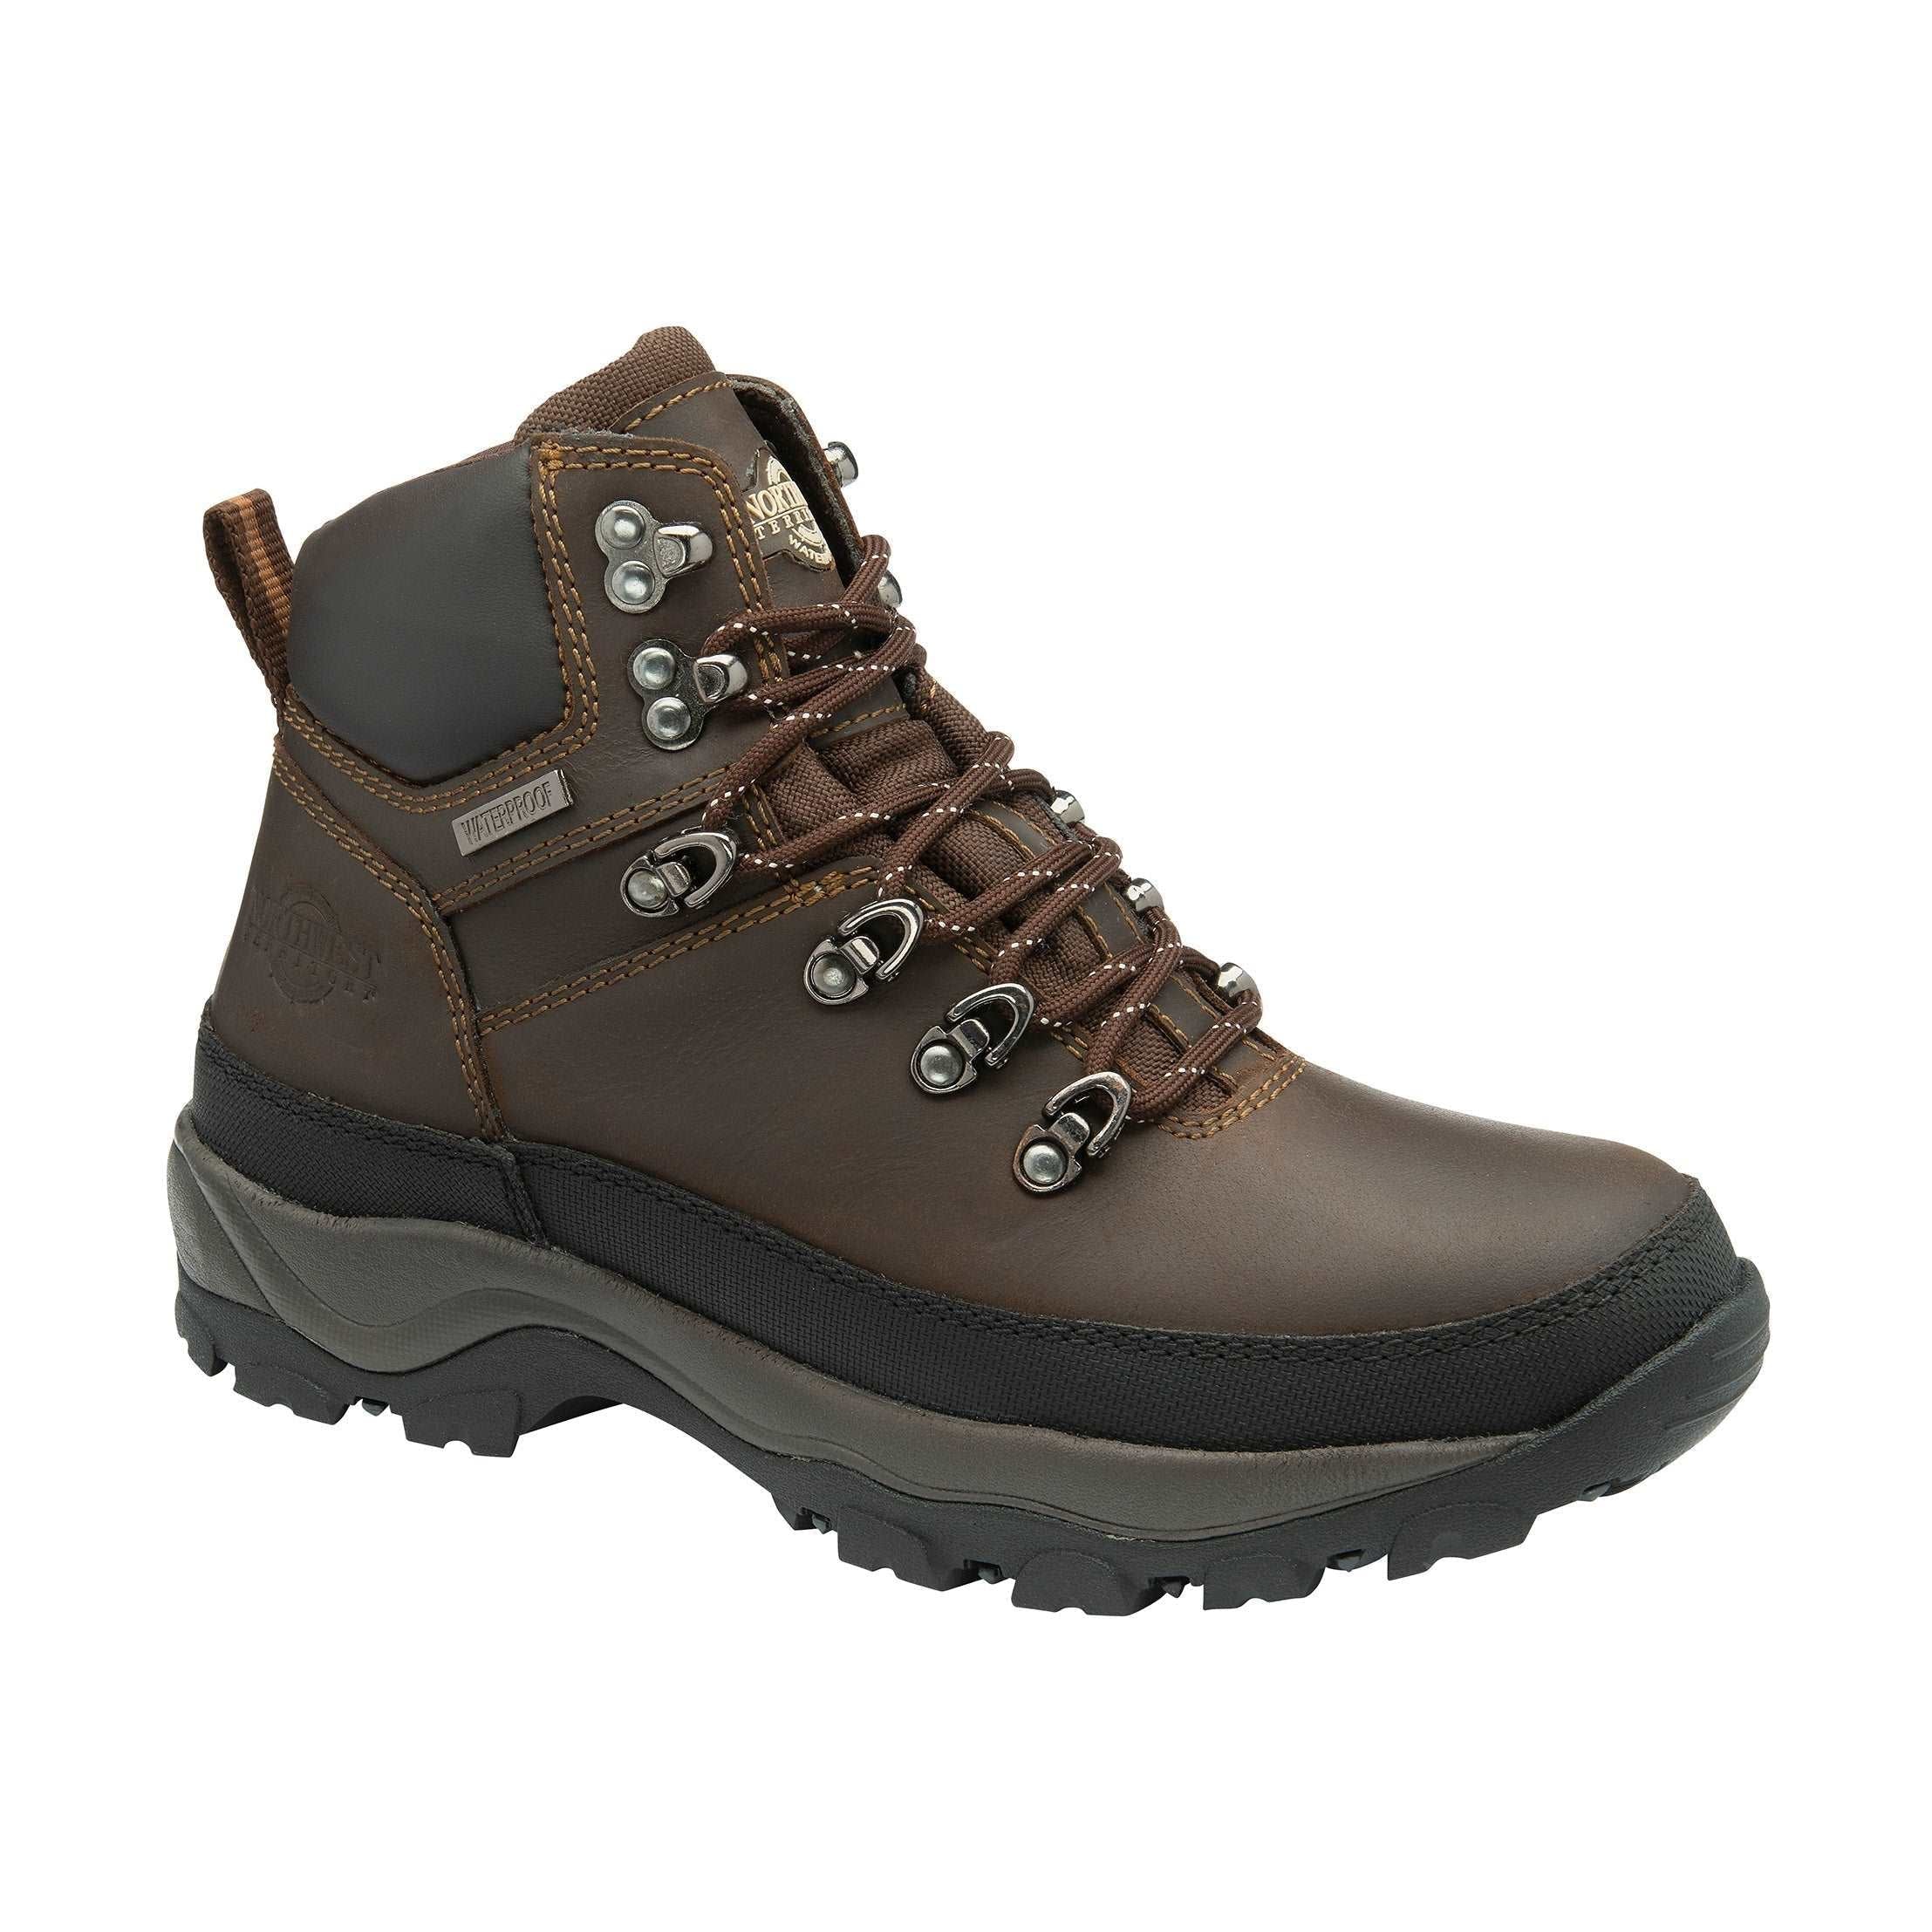 Rayrock Leather Waterproof Walking And Hiking Boots